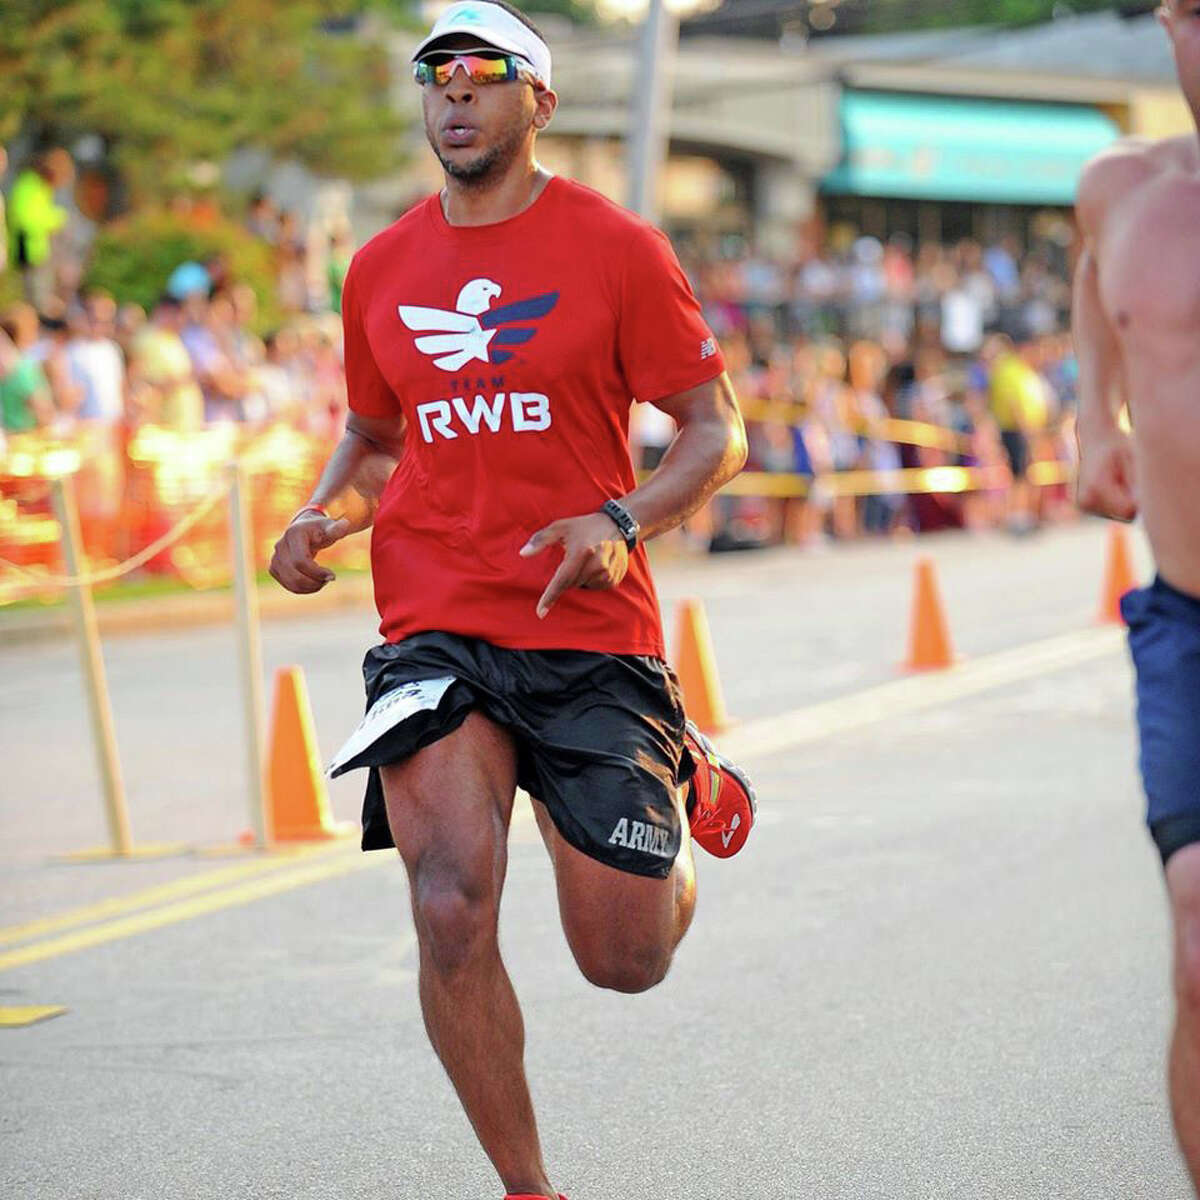 Former Danbury resident and Army veteran Alex Cabrera will be competing in the Danbury half marathon on March 29. Cabrera will be running as part of Team RWB, an organization that helps veterans adjust to civilian life after returning home from active duty.